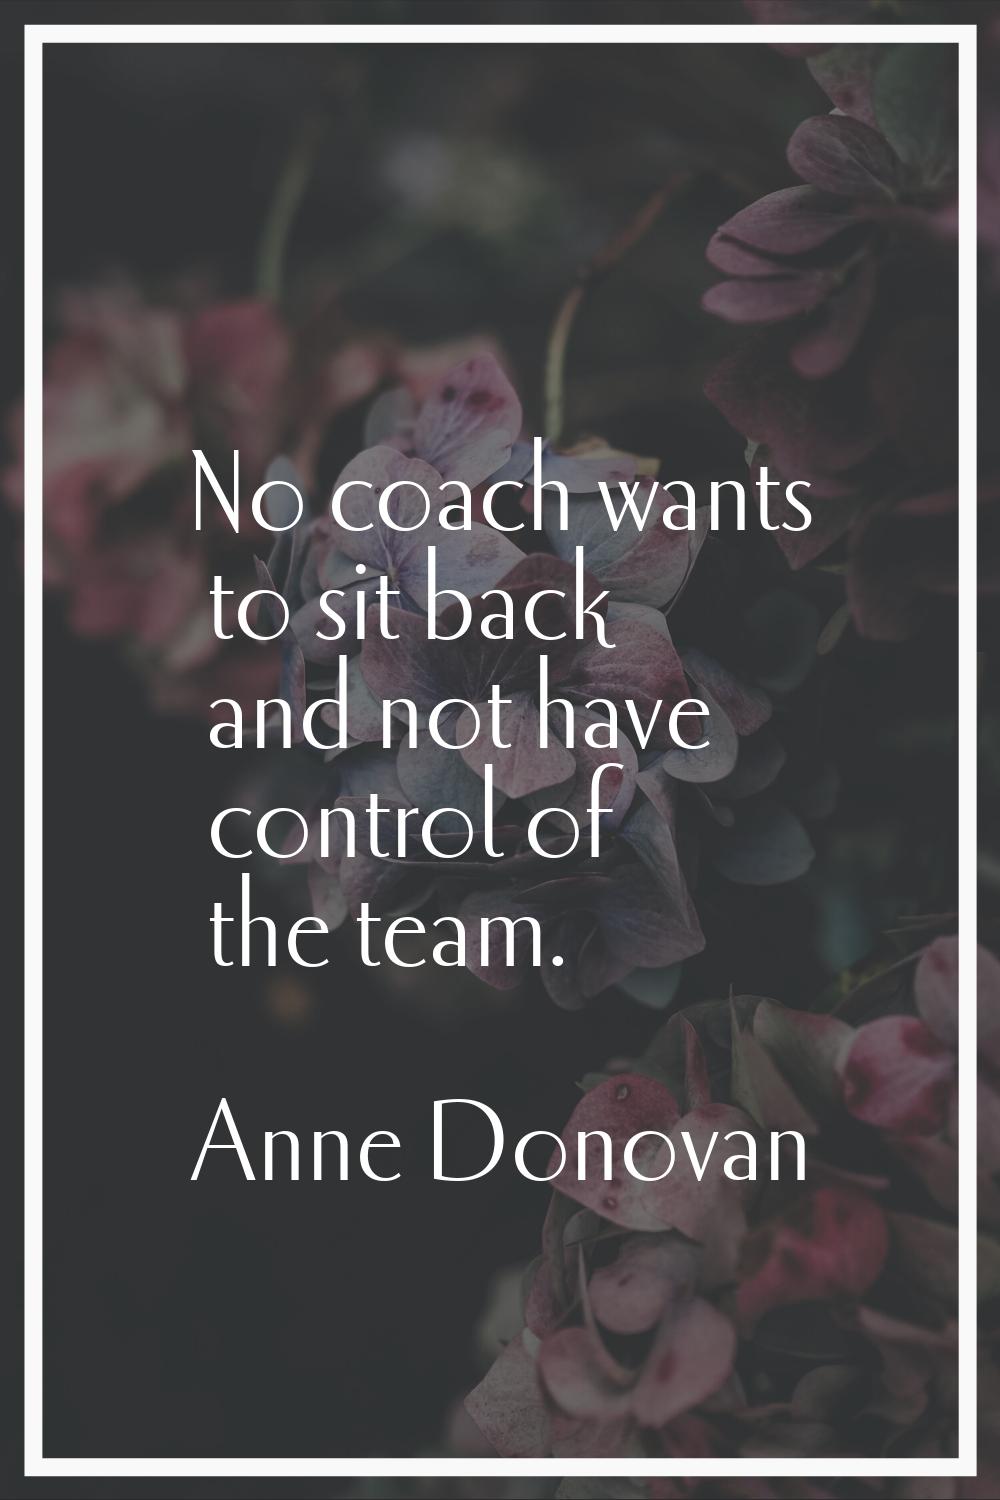 No coach wants to sit back and not have control of the team.